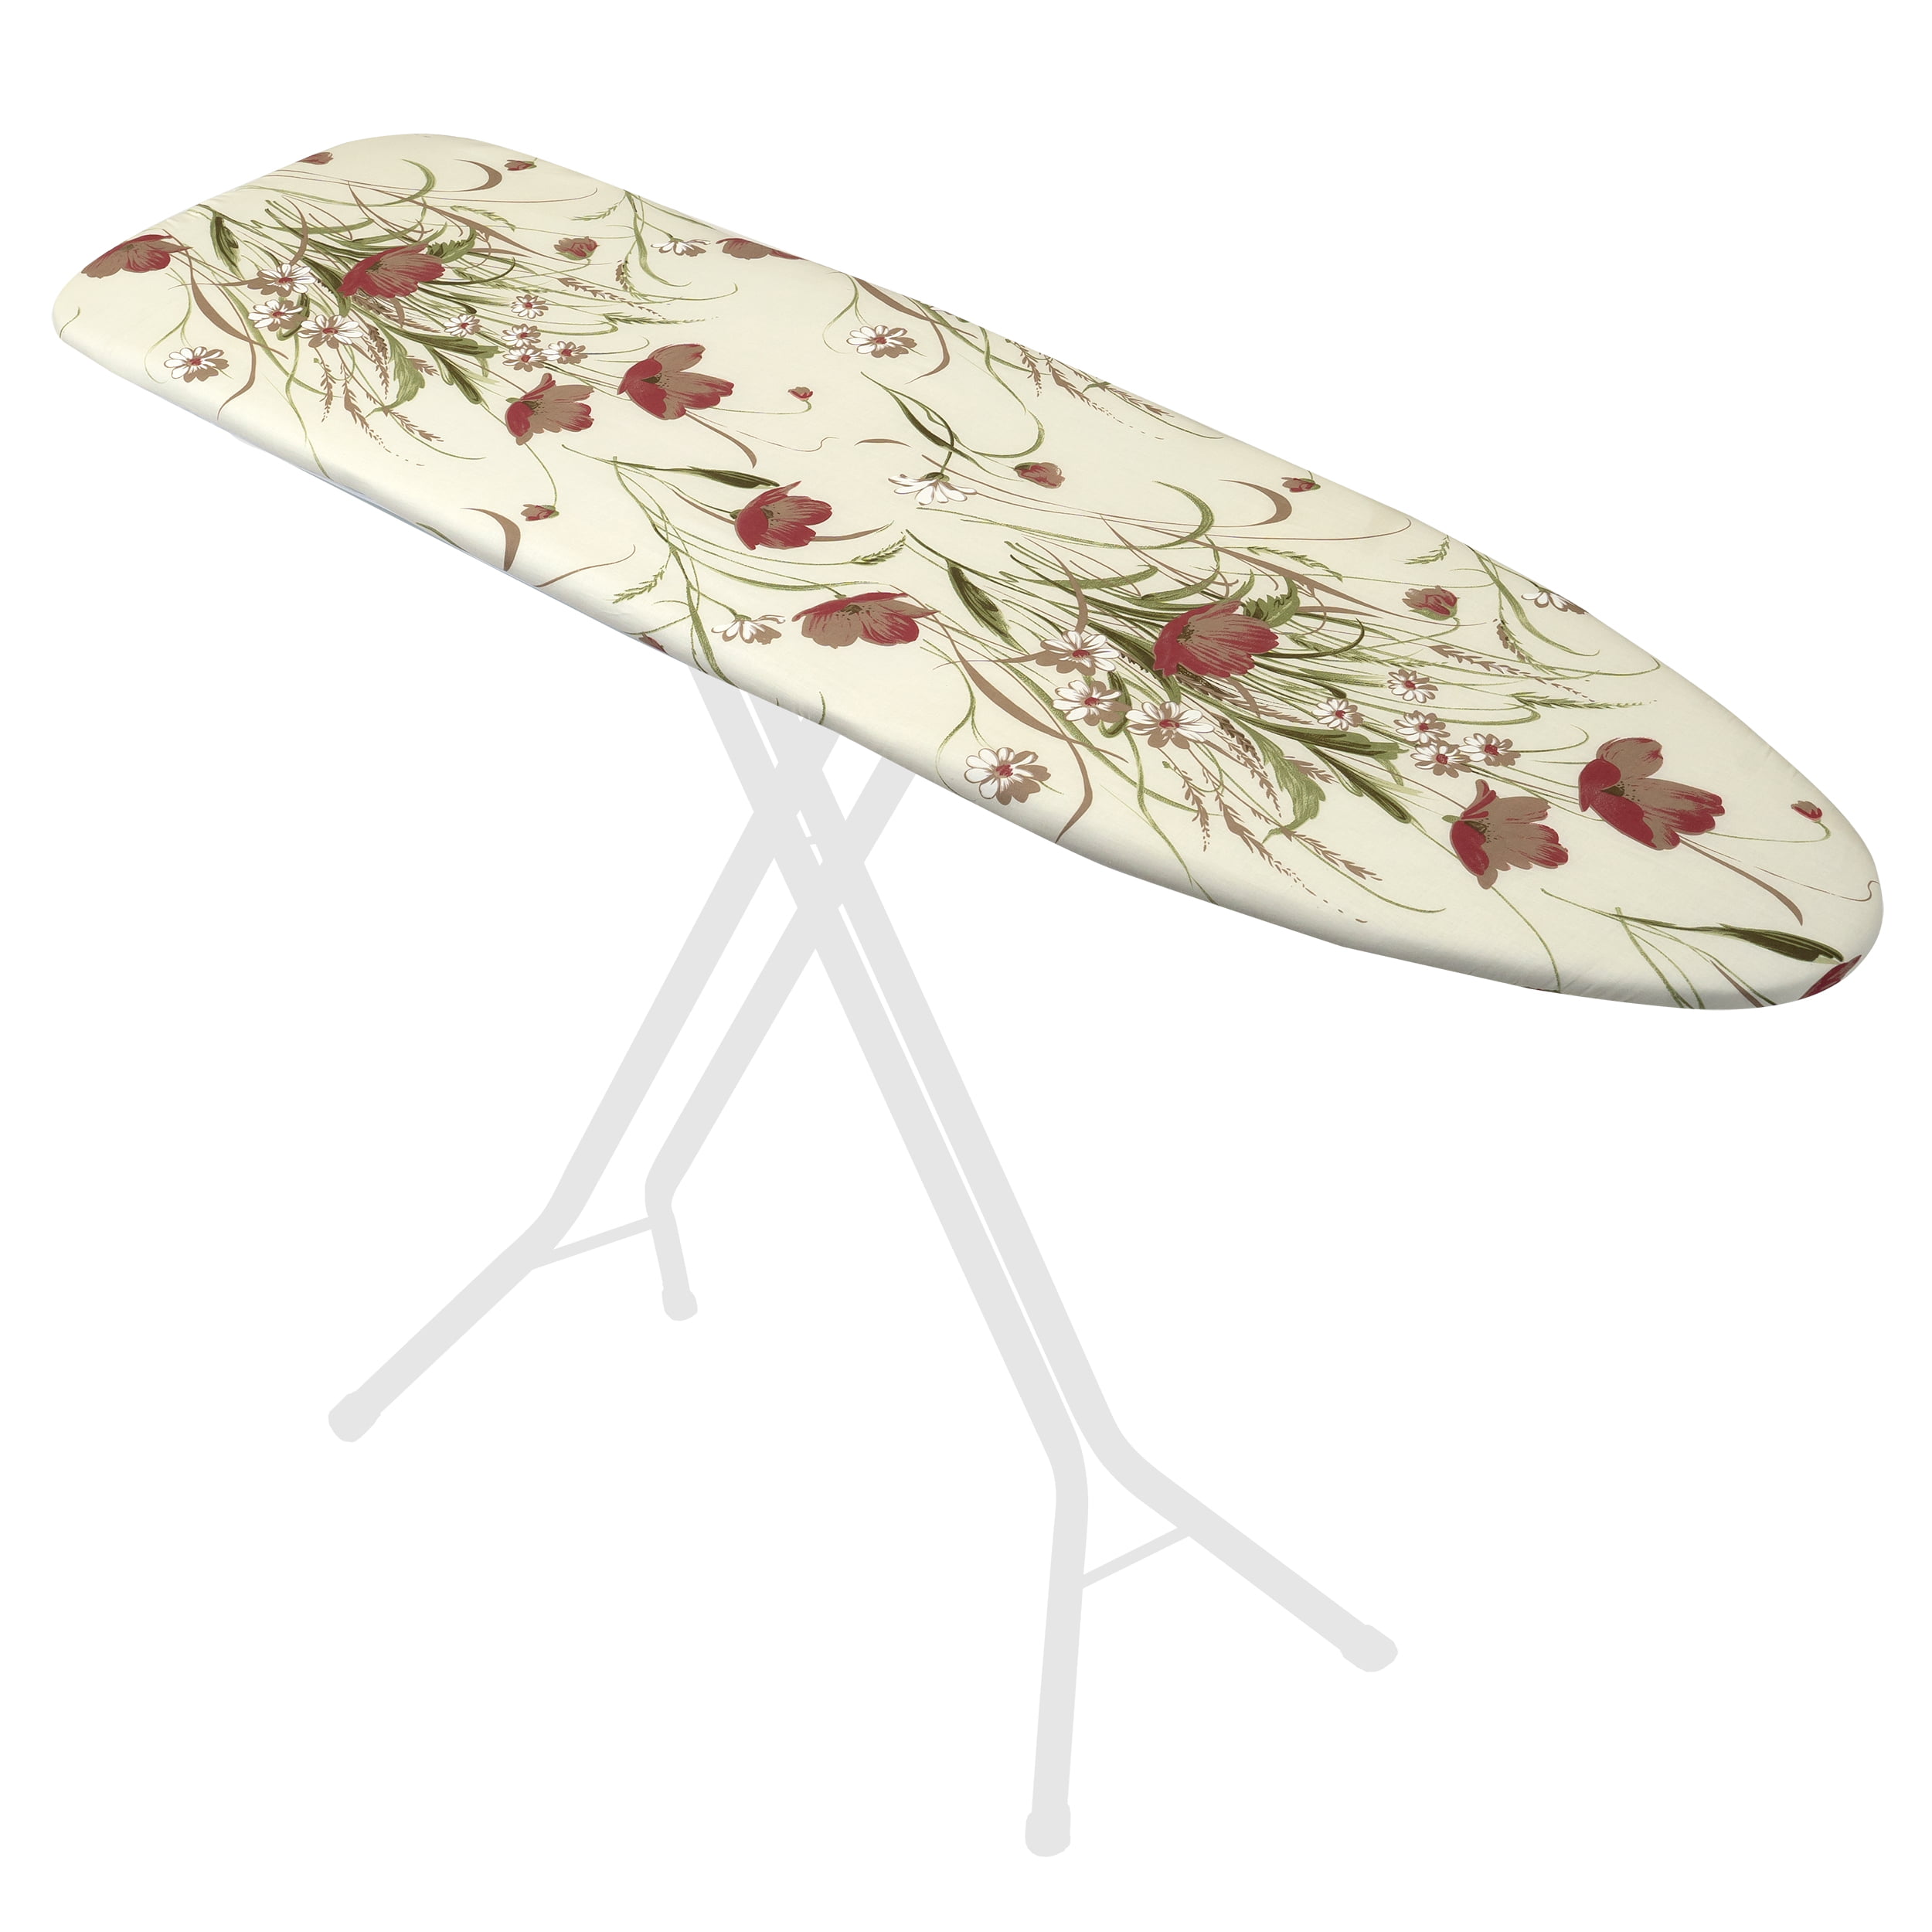 Deluxe Ironing Board Cover & Pad Grey and White with Floral Pattern 